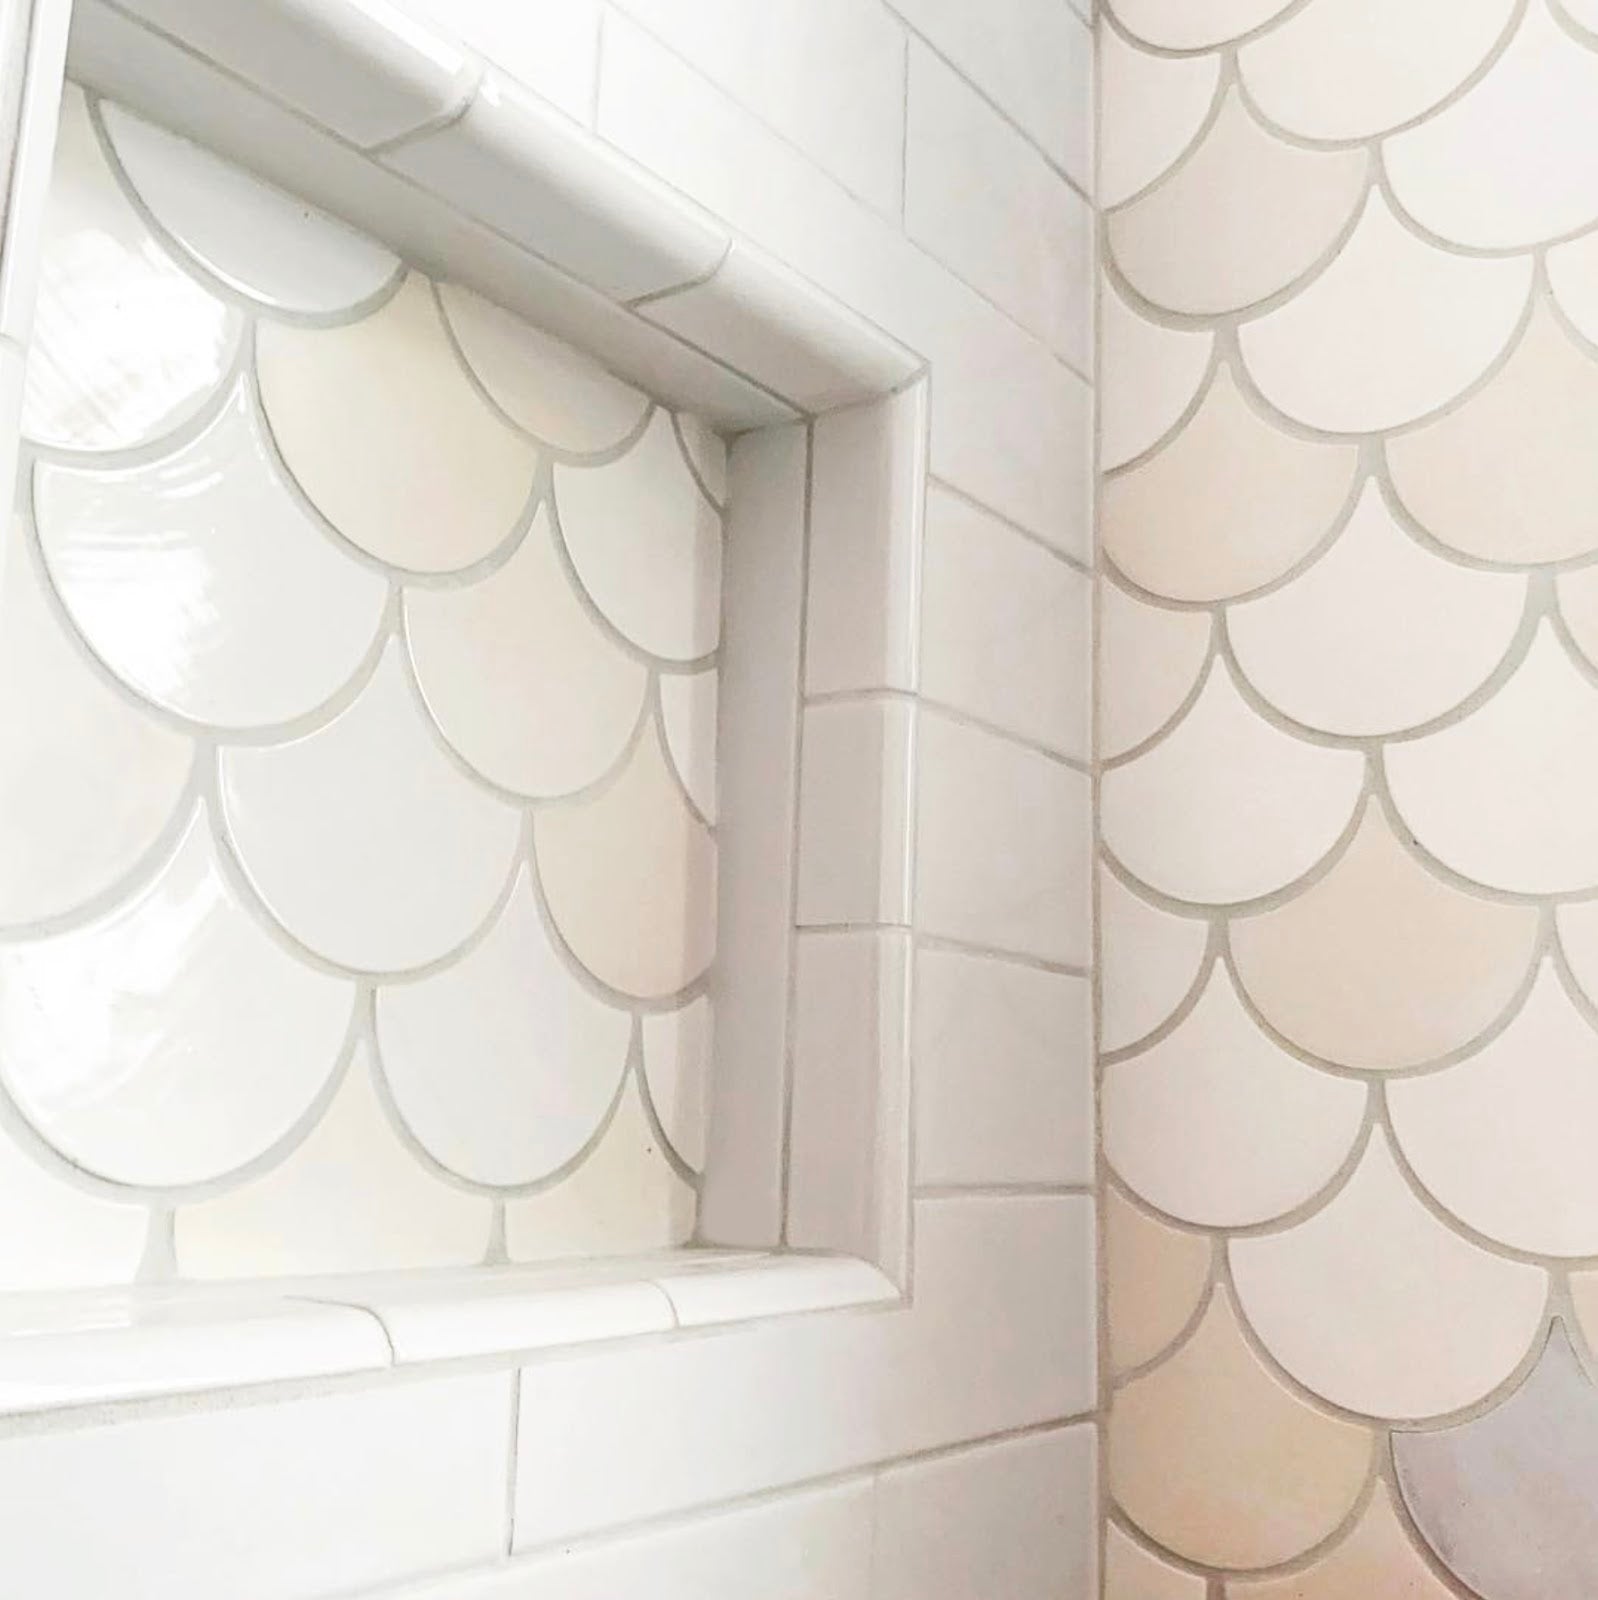 How to Plan for Your Bathroom Niche - Mercury Mosaics